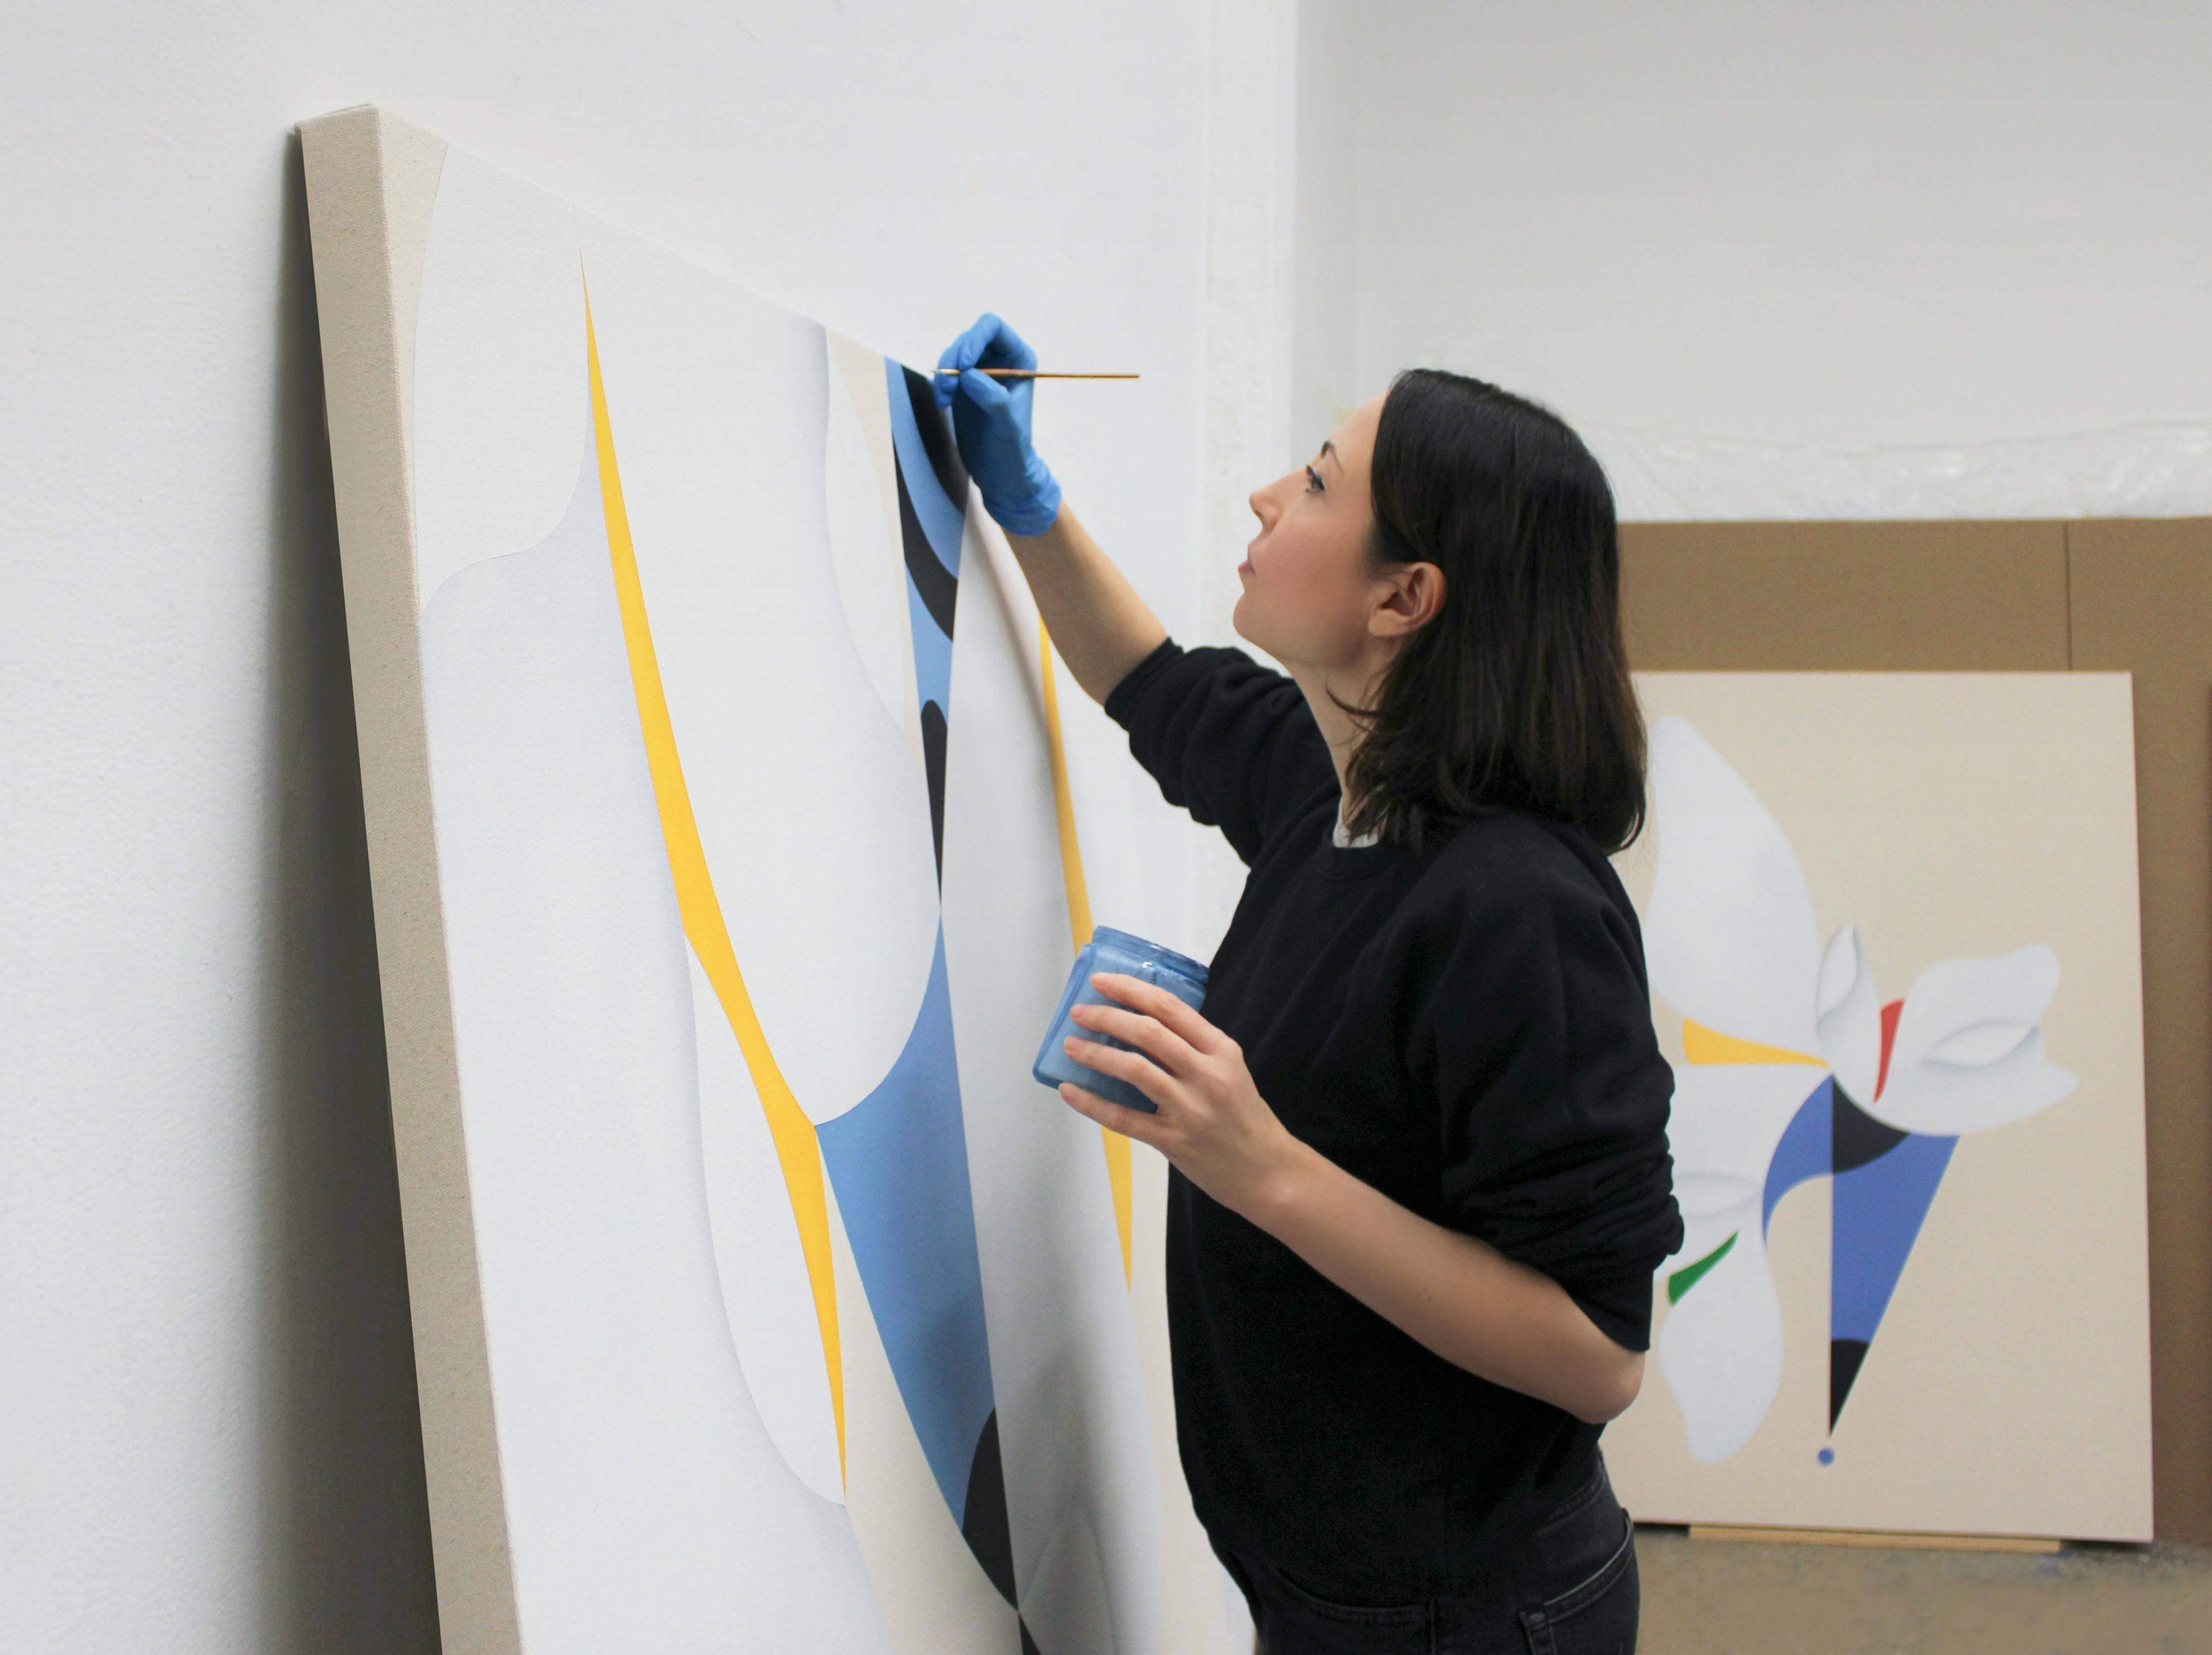 Artist Senem Oezdogan working on a large blue, yellow and white painting in her studio. 